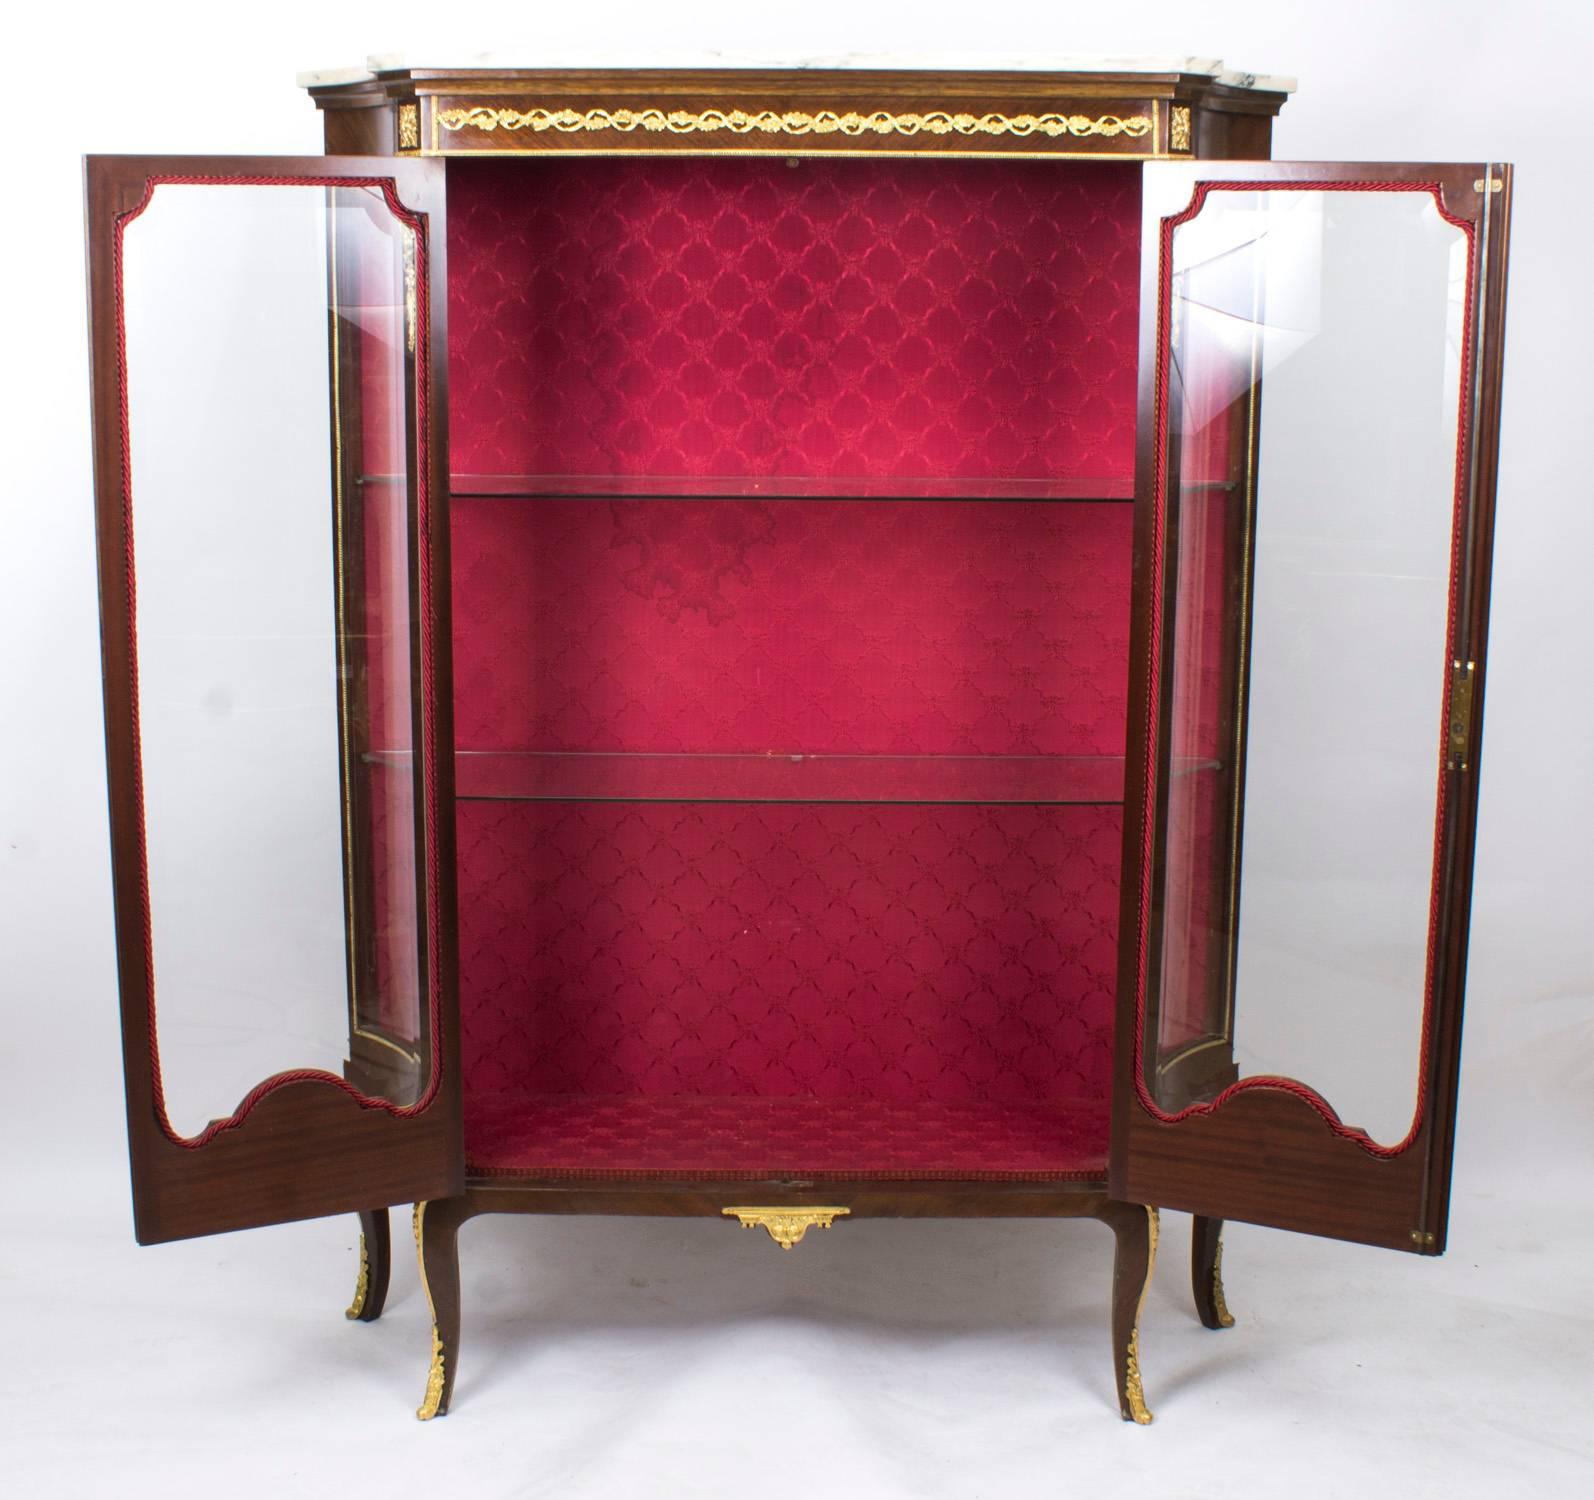 This is a wonderful antique French mahogany and ormolu-mounted display cabinet in the French Louis XV manner, circa 1880 in date.

This beautiful cabinet has an abundance of exquisite decorative ormolu mounts. It has a pair of glazed doors to the